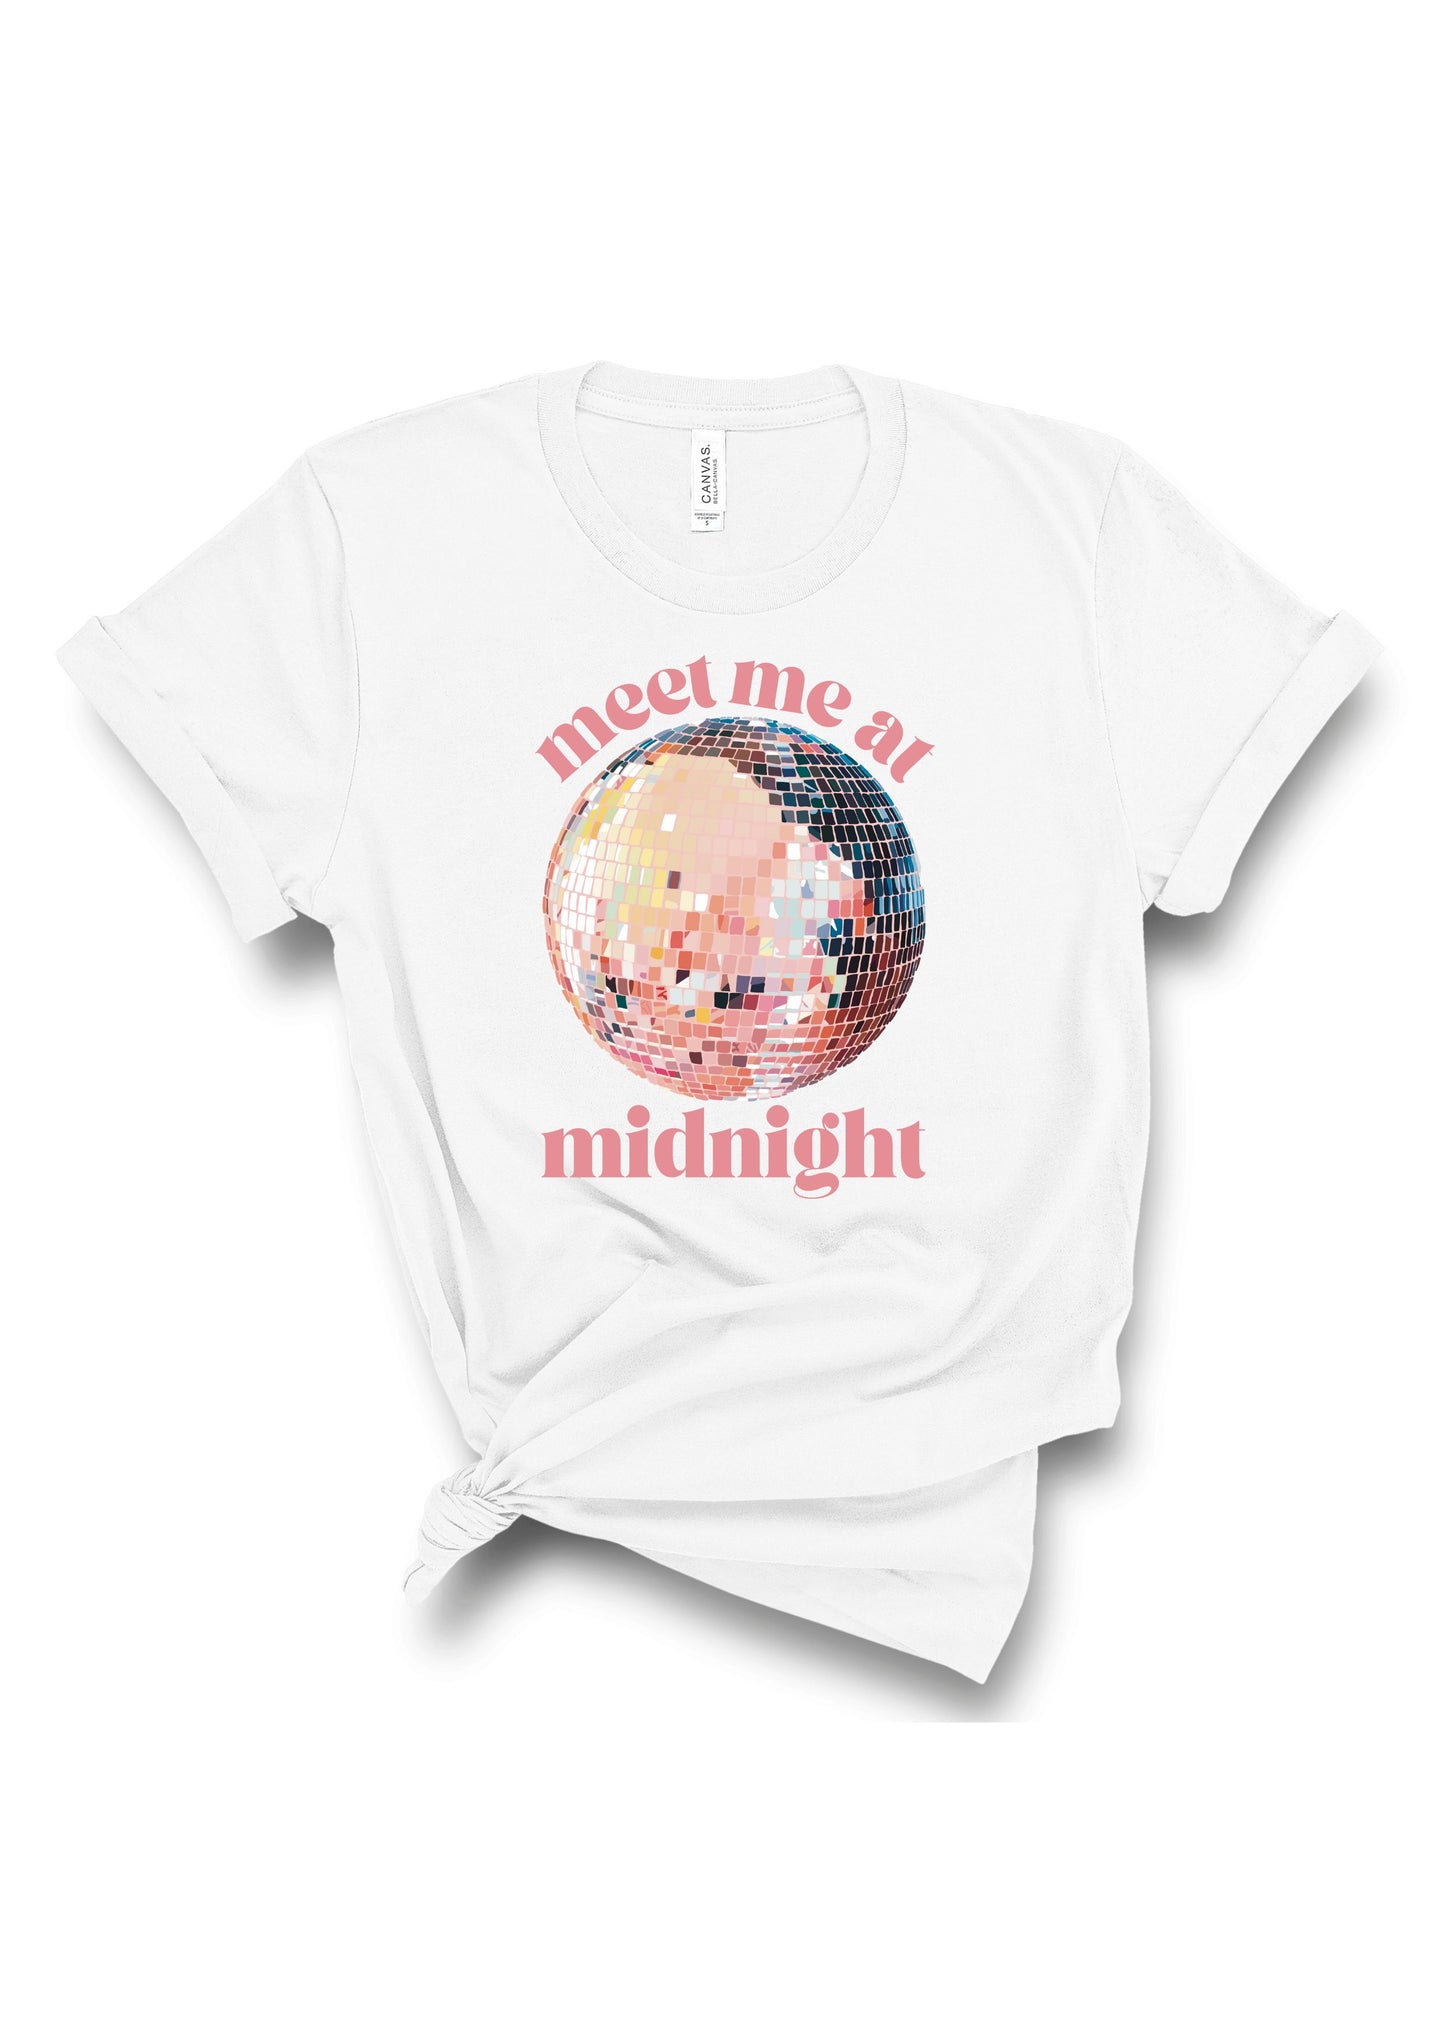 Meet Me at Midnight | Adult Tee | RTS-Sister Shirts-Sister Shirts, Cute & Custom Tees for Mama & Littles in Trussville, Alabama.